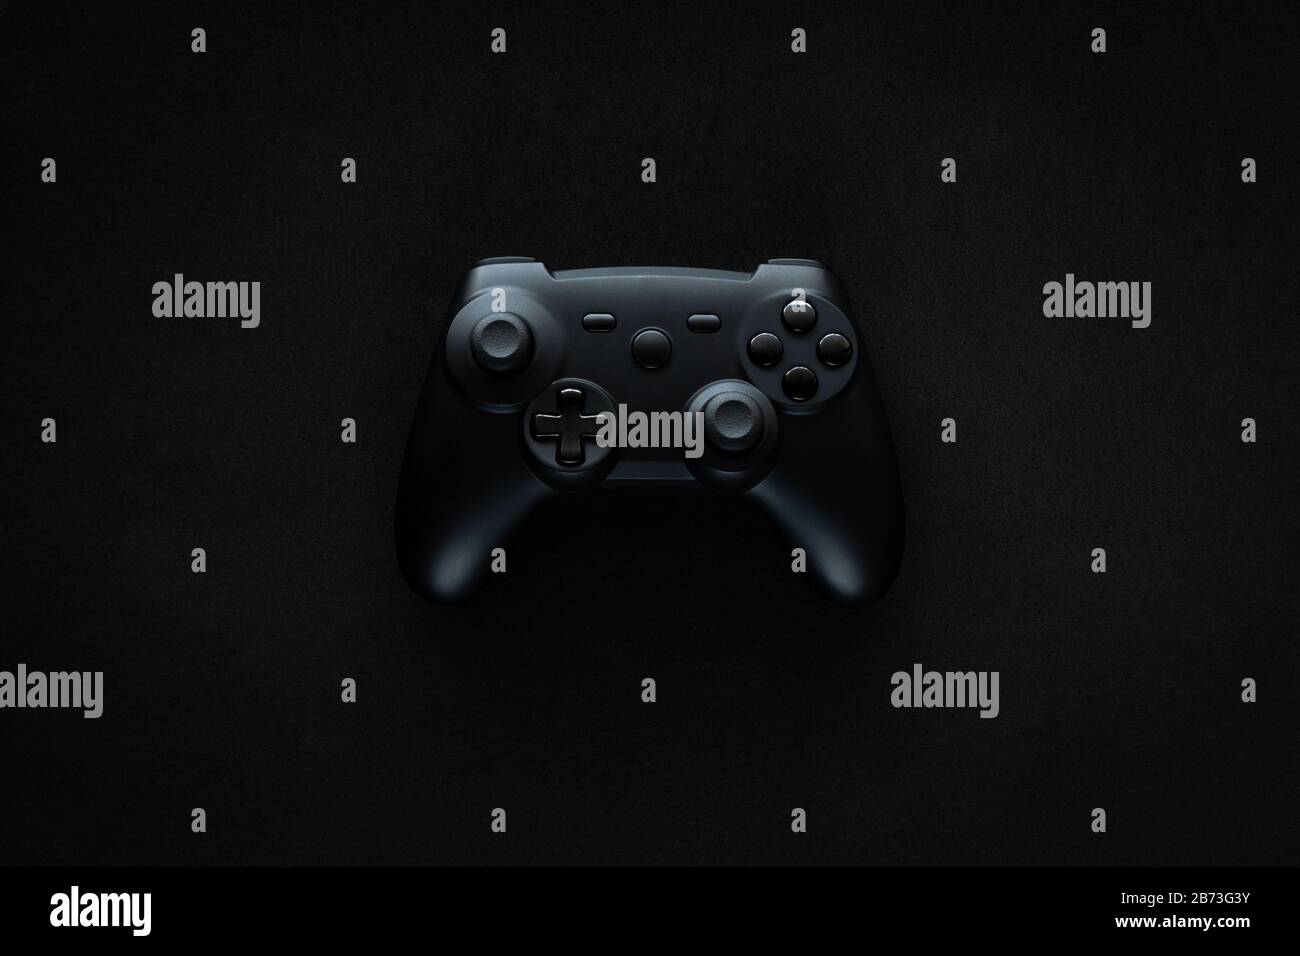 Stock photo of a black gamepad in the middle of a textured black background Stock Photo